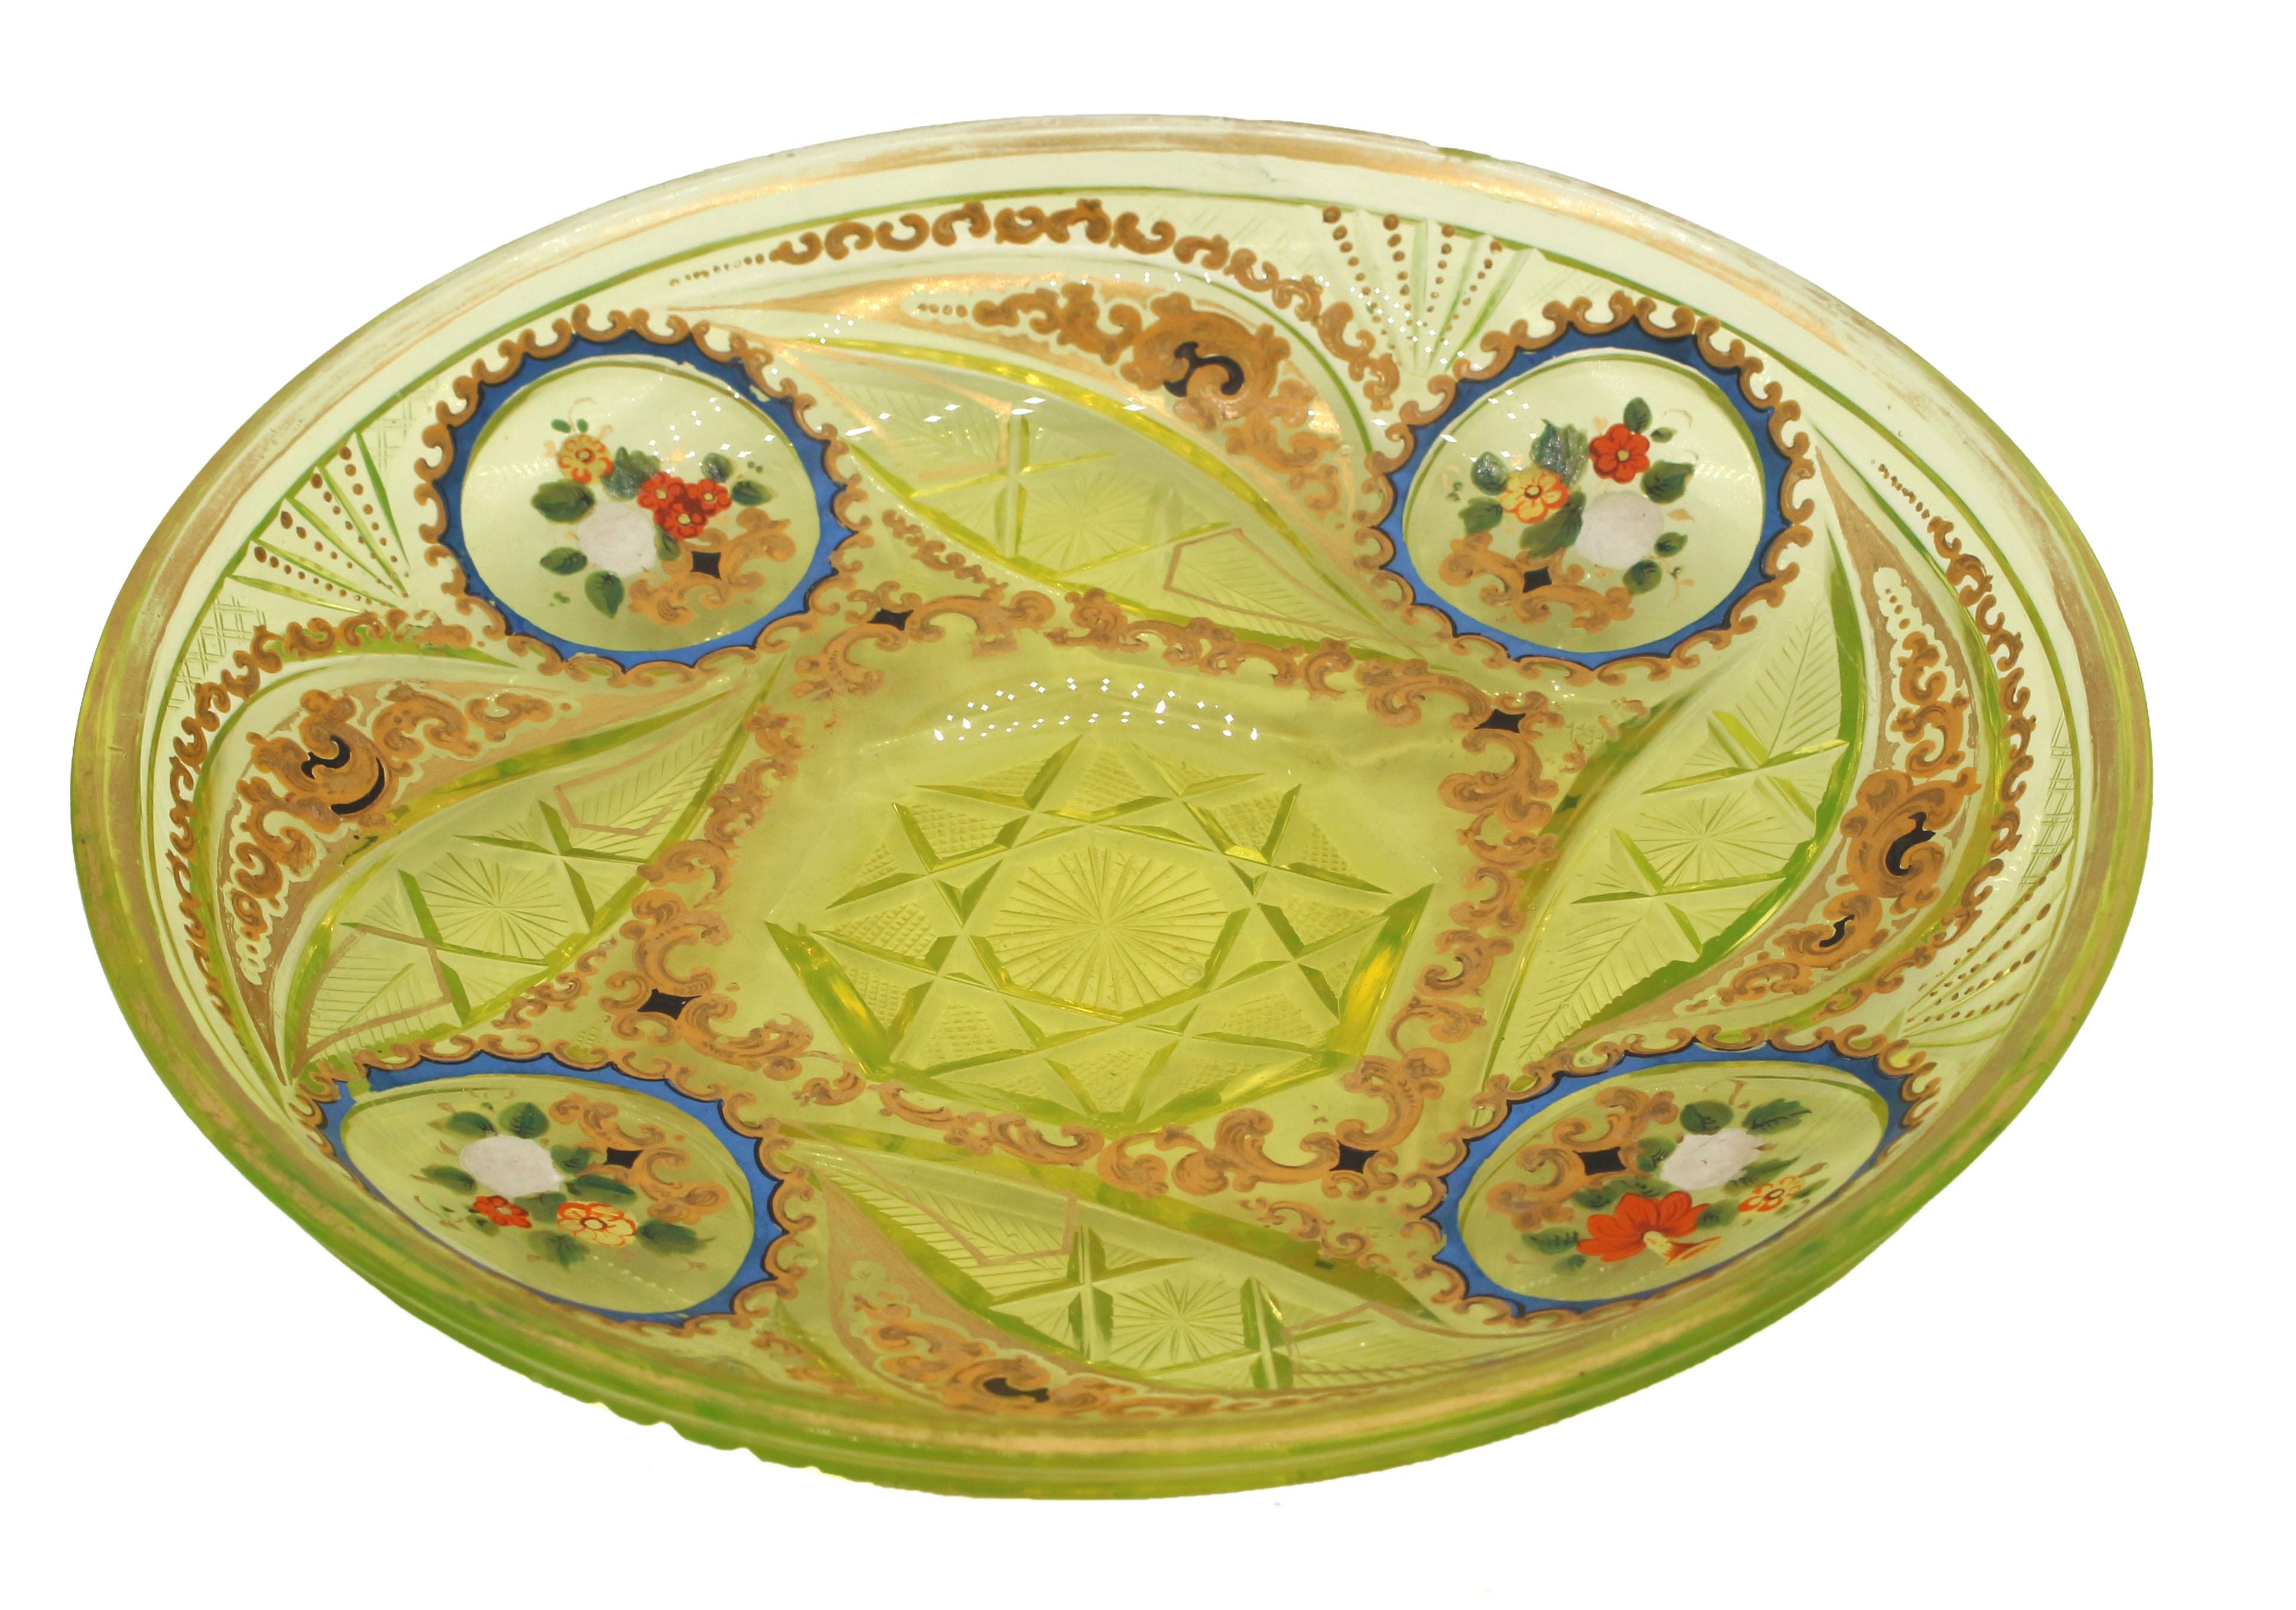 2nd half 19th century Bohemian vaseline glass  (also called Uraline or Ouraline glass) serving plate. Blown & cut, then enameled & gilded. Central octagonal indentation - may have been the stand to another piece. Two small border chips & some